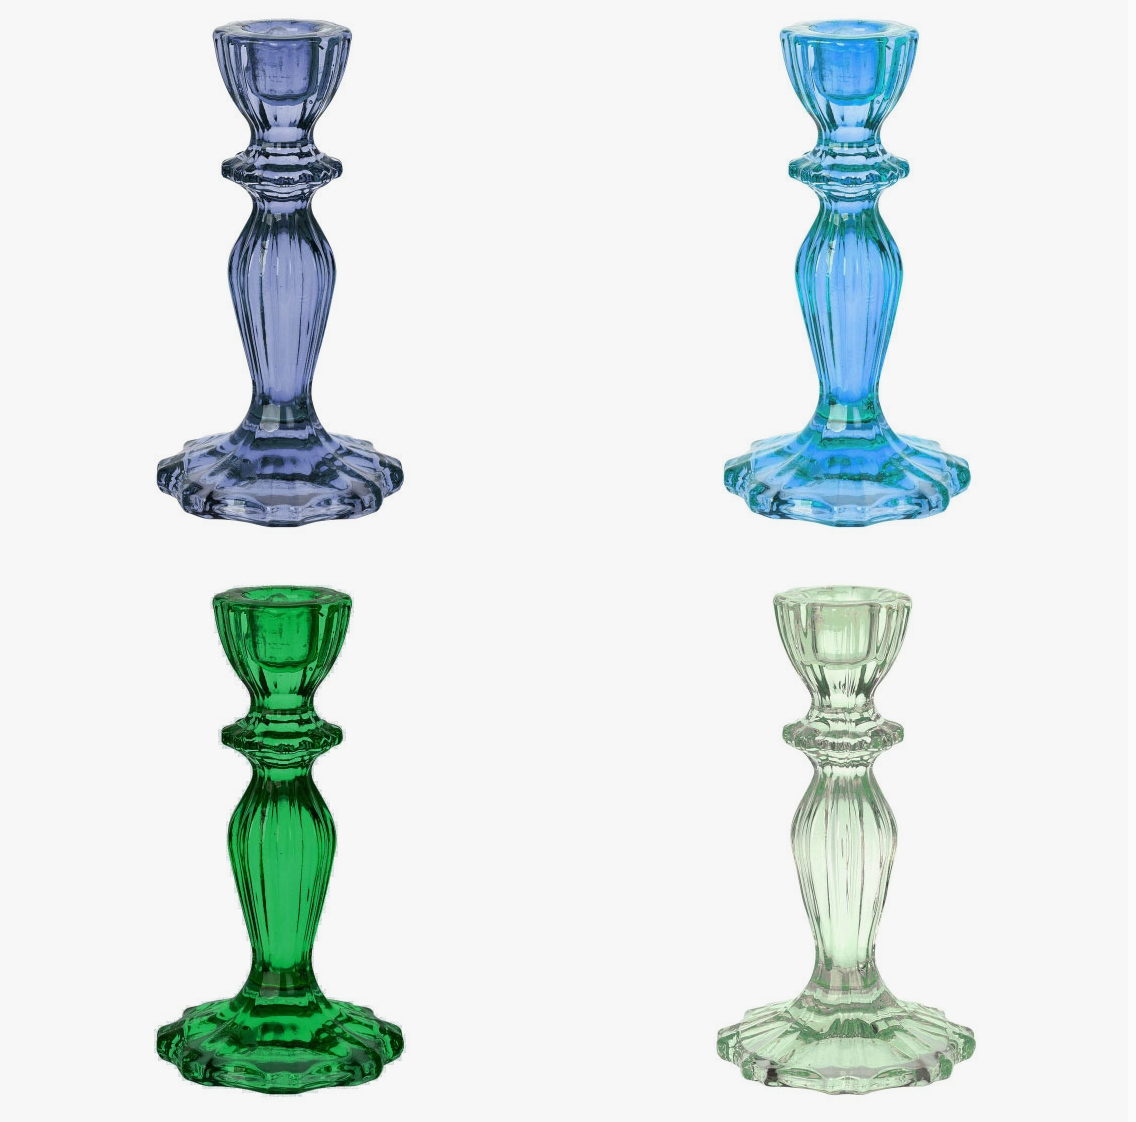 The Canton Christmas Shop Shades of Blue and Green Glass Candle Holders Candlesticks for holidays parties birthdays Christmas candles